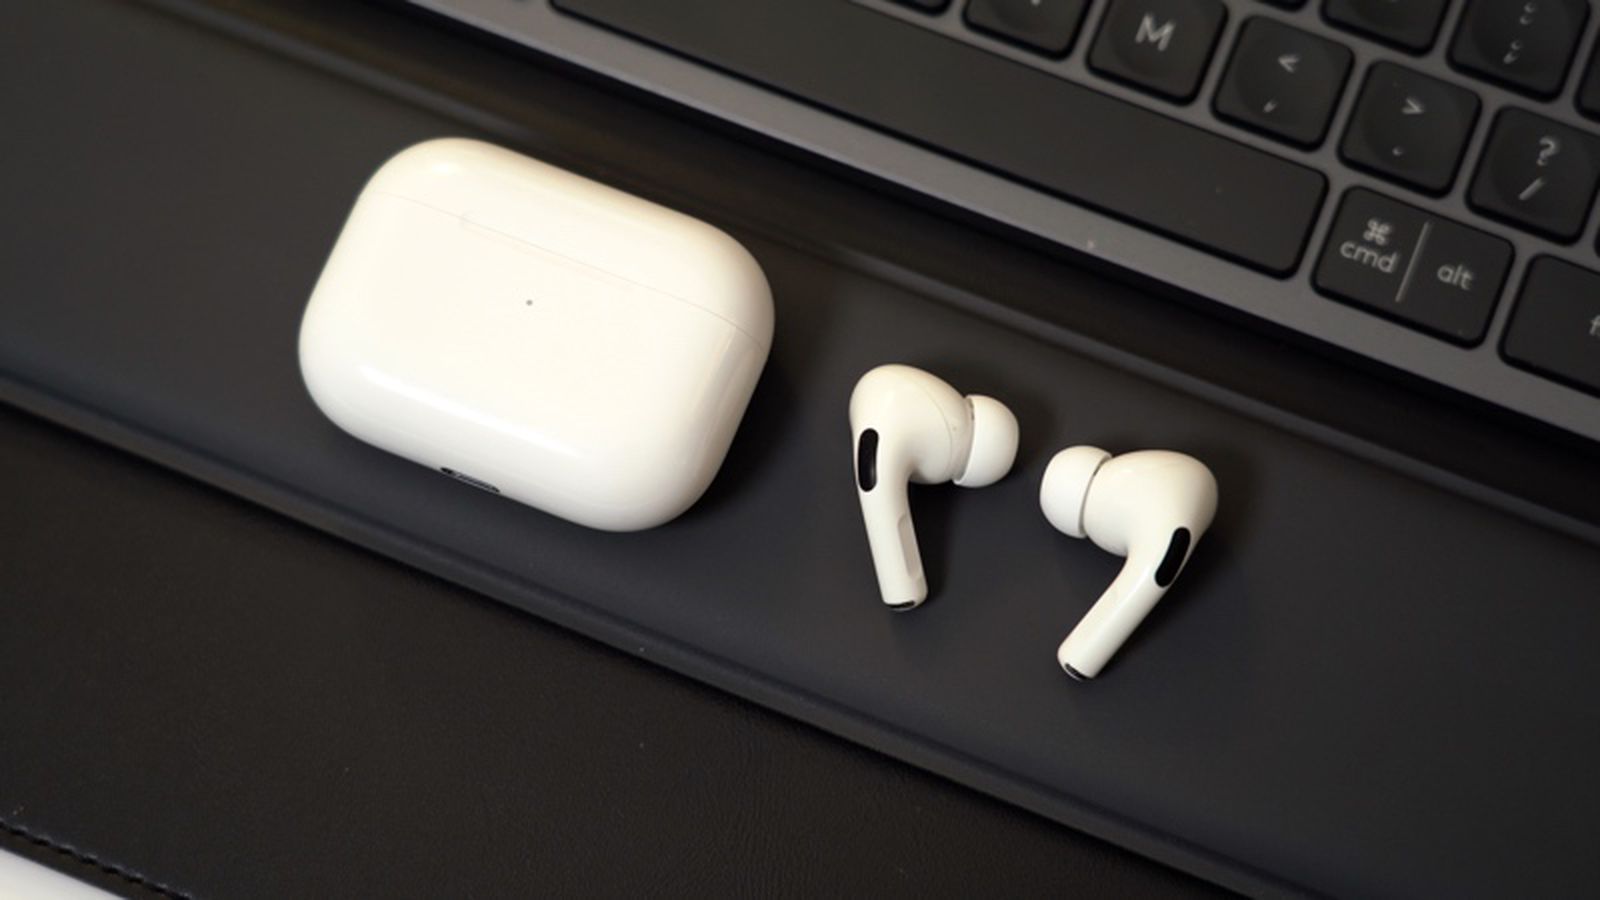 Kuo: AirPods, MagSafe Battery Pack, and Other Accessories Also to Switch to USB-C in Future - macrumors.com